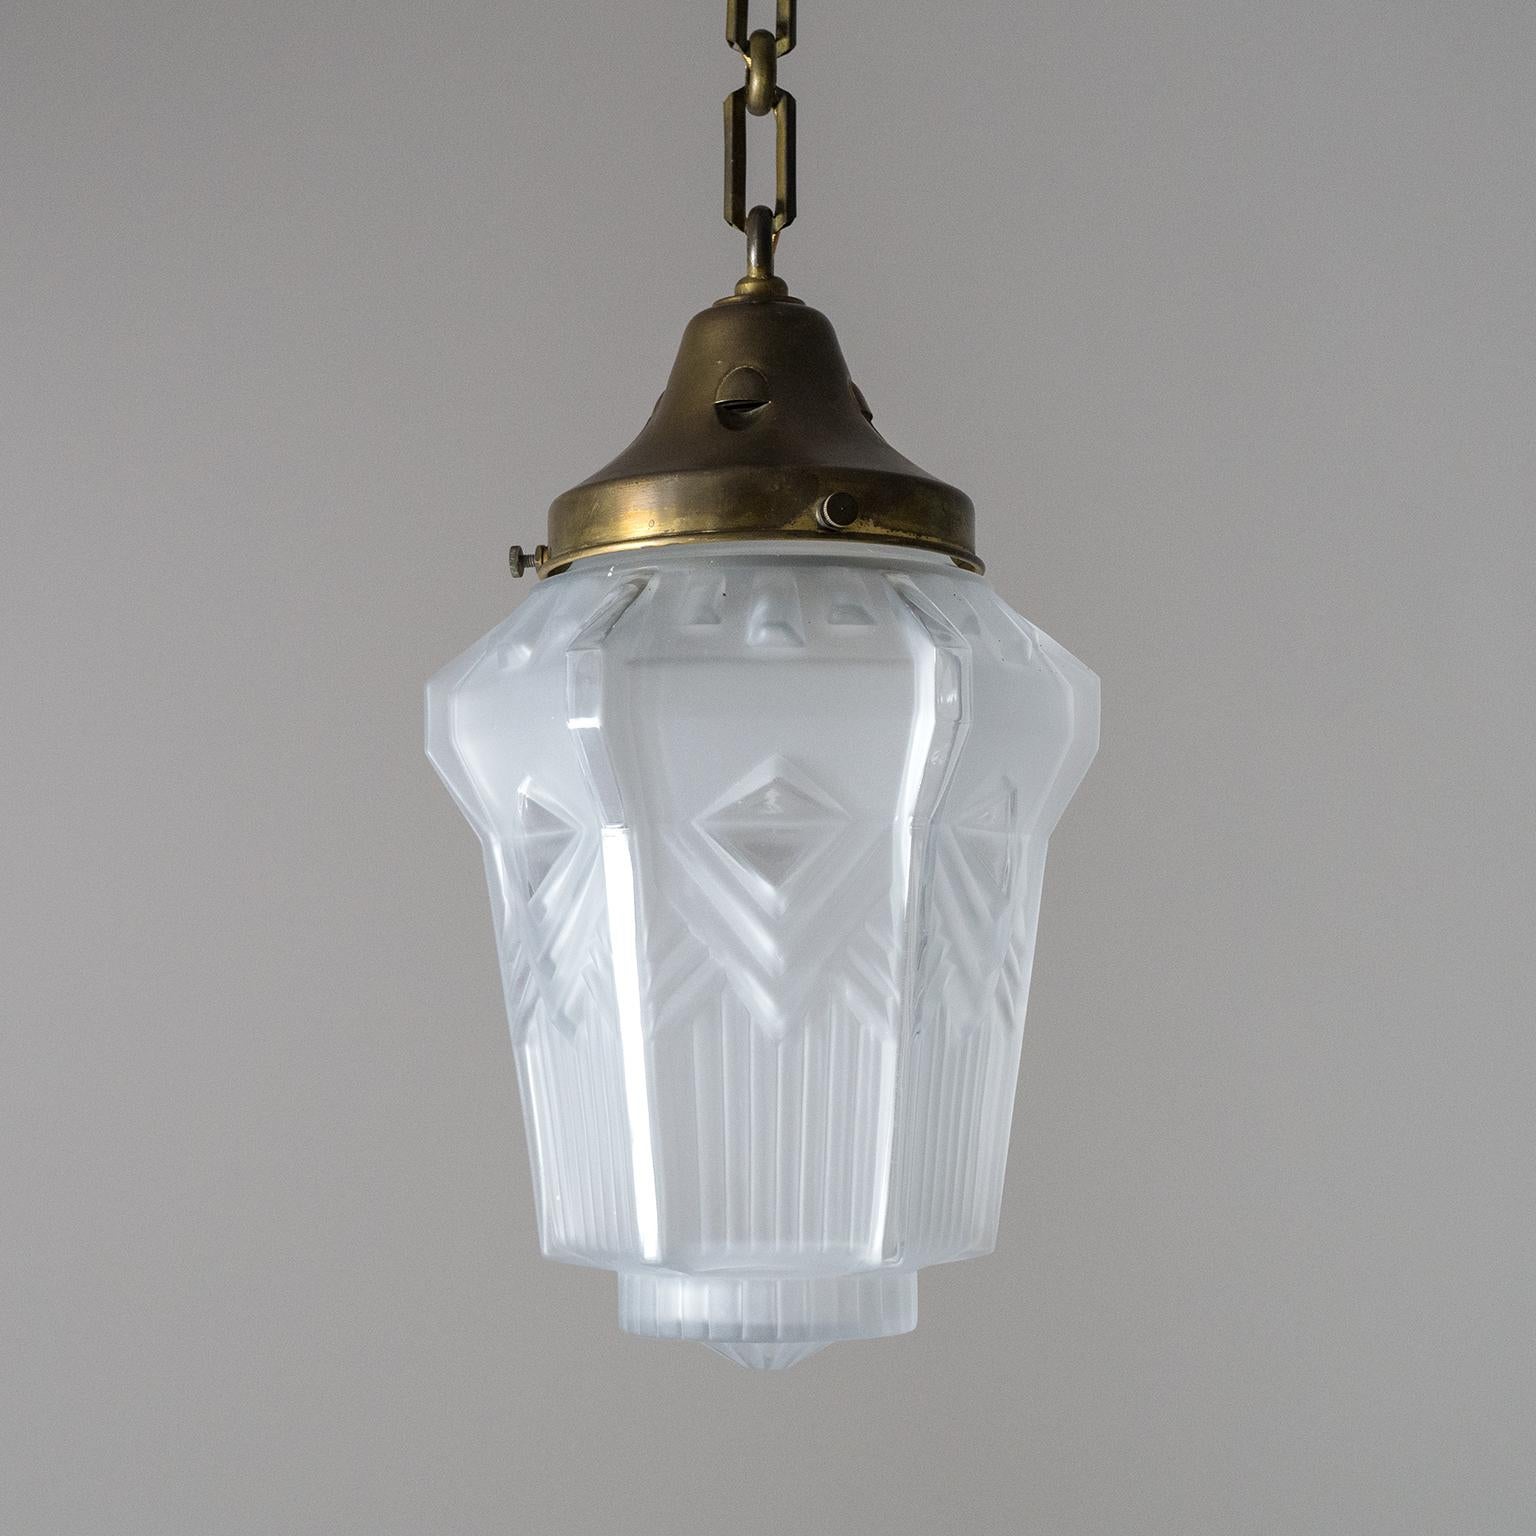 1920s French Art Deco Pendant, Brass and Geometric Glass 8